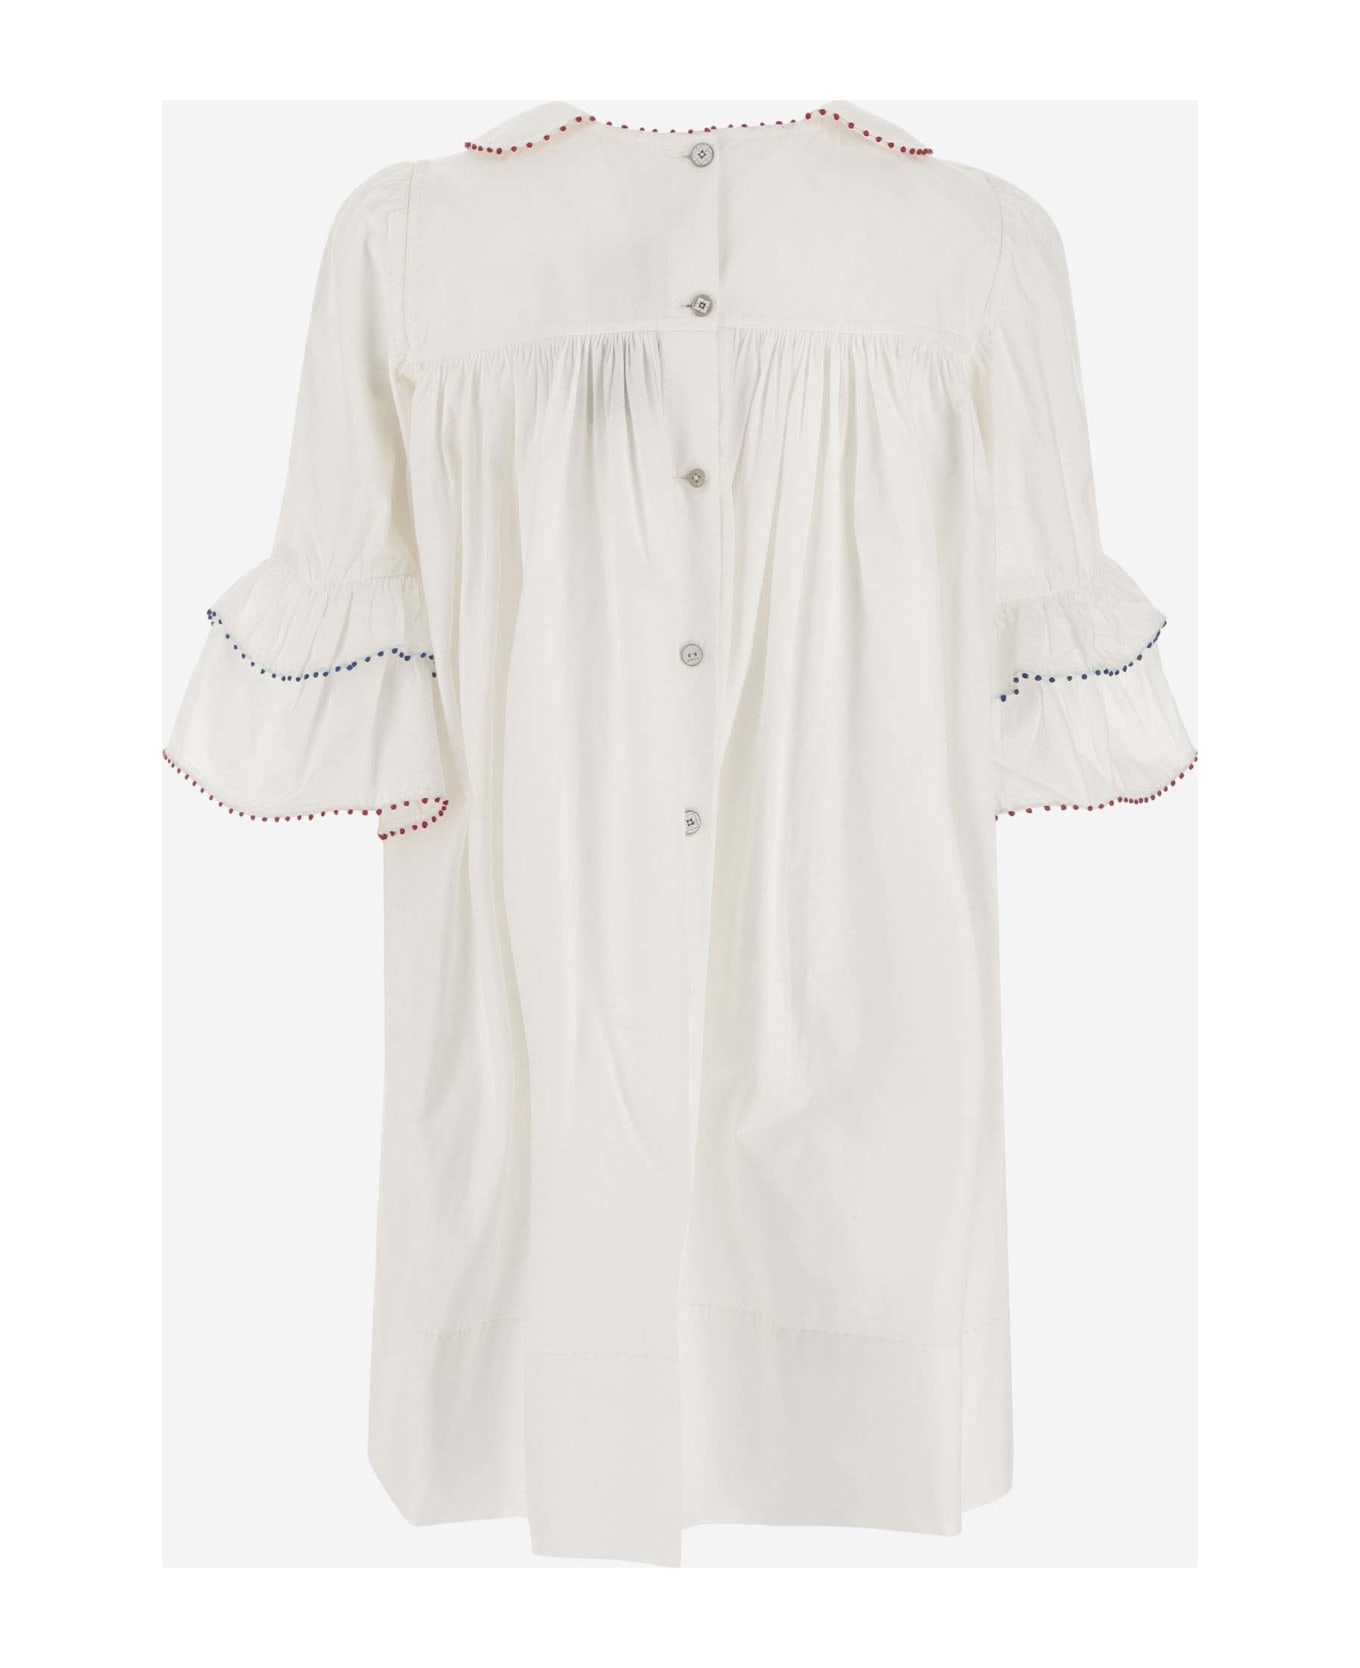 Péro Cotton Dress With Embroidery - White